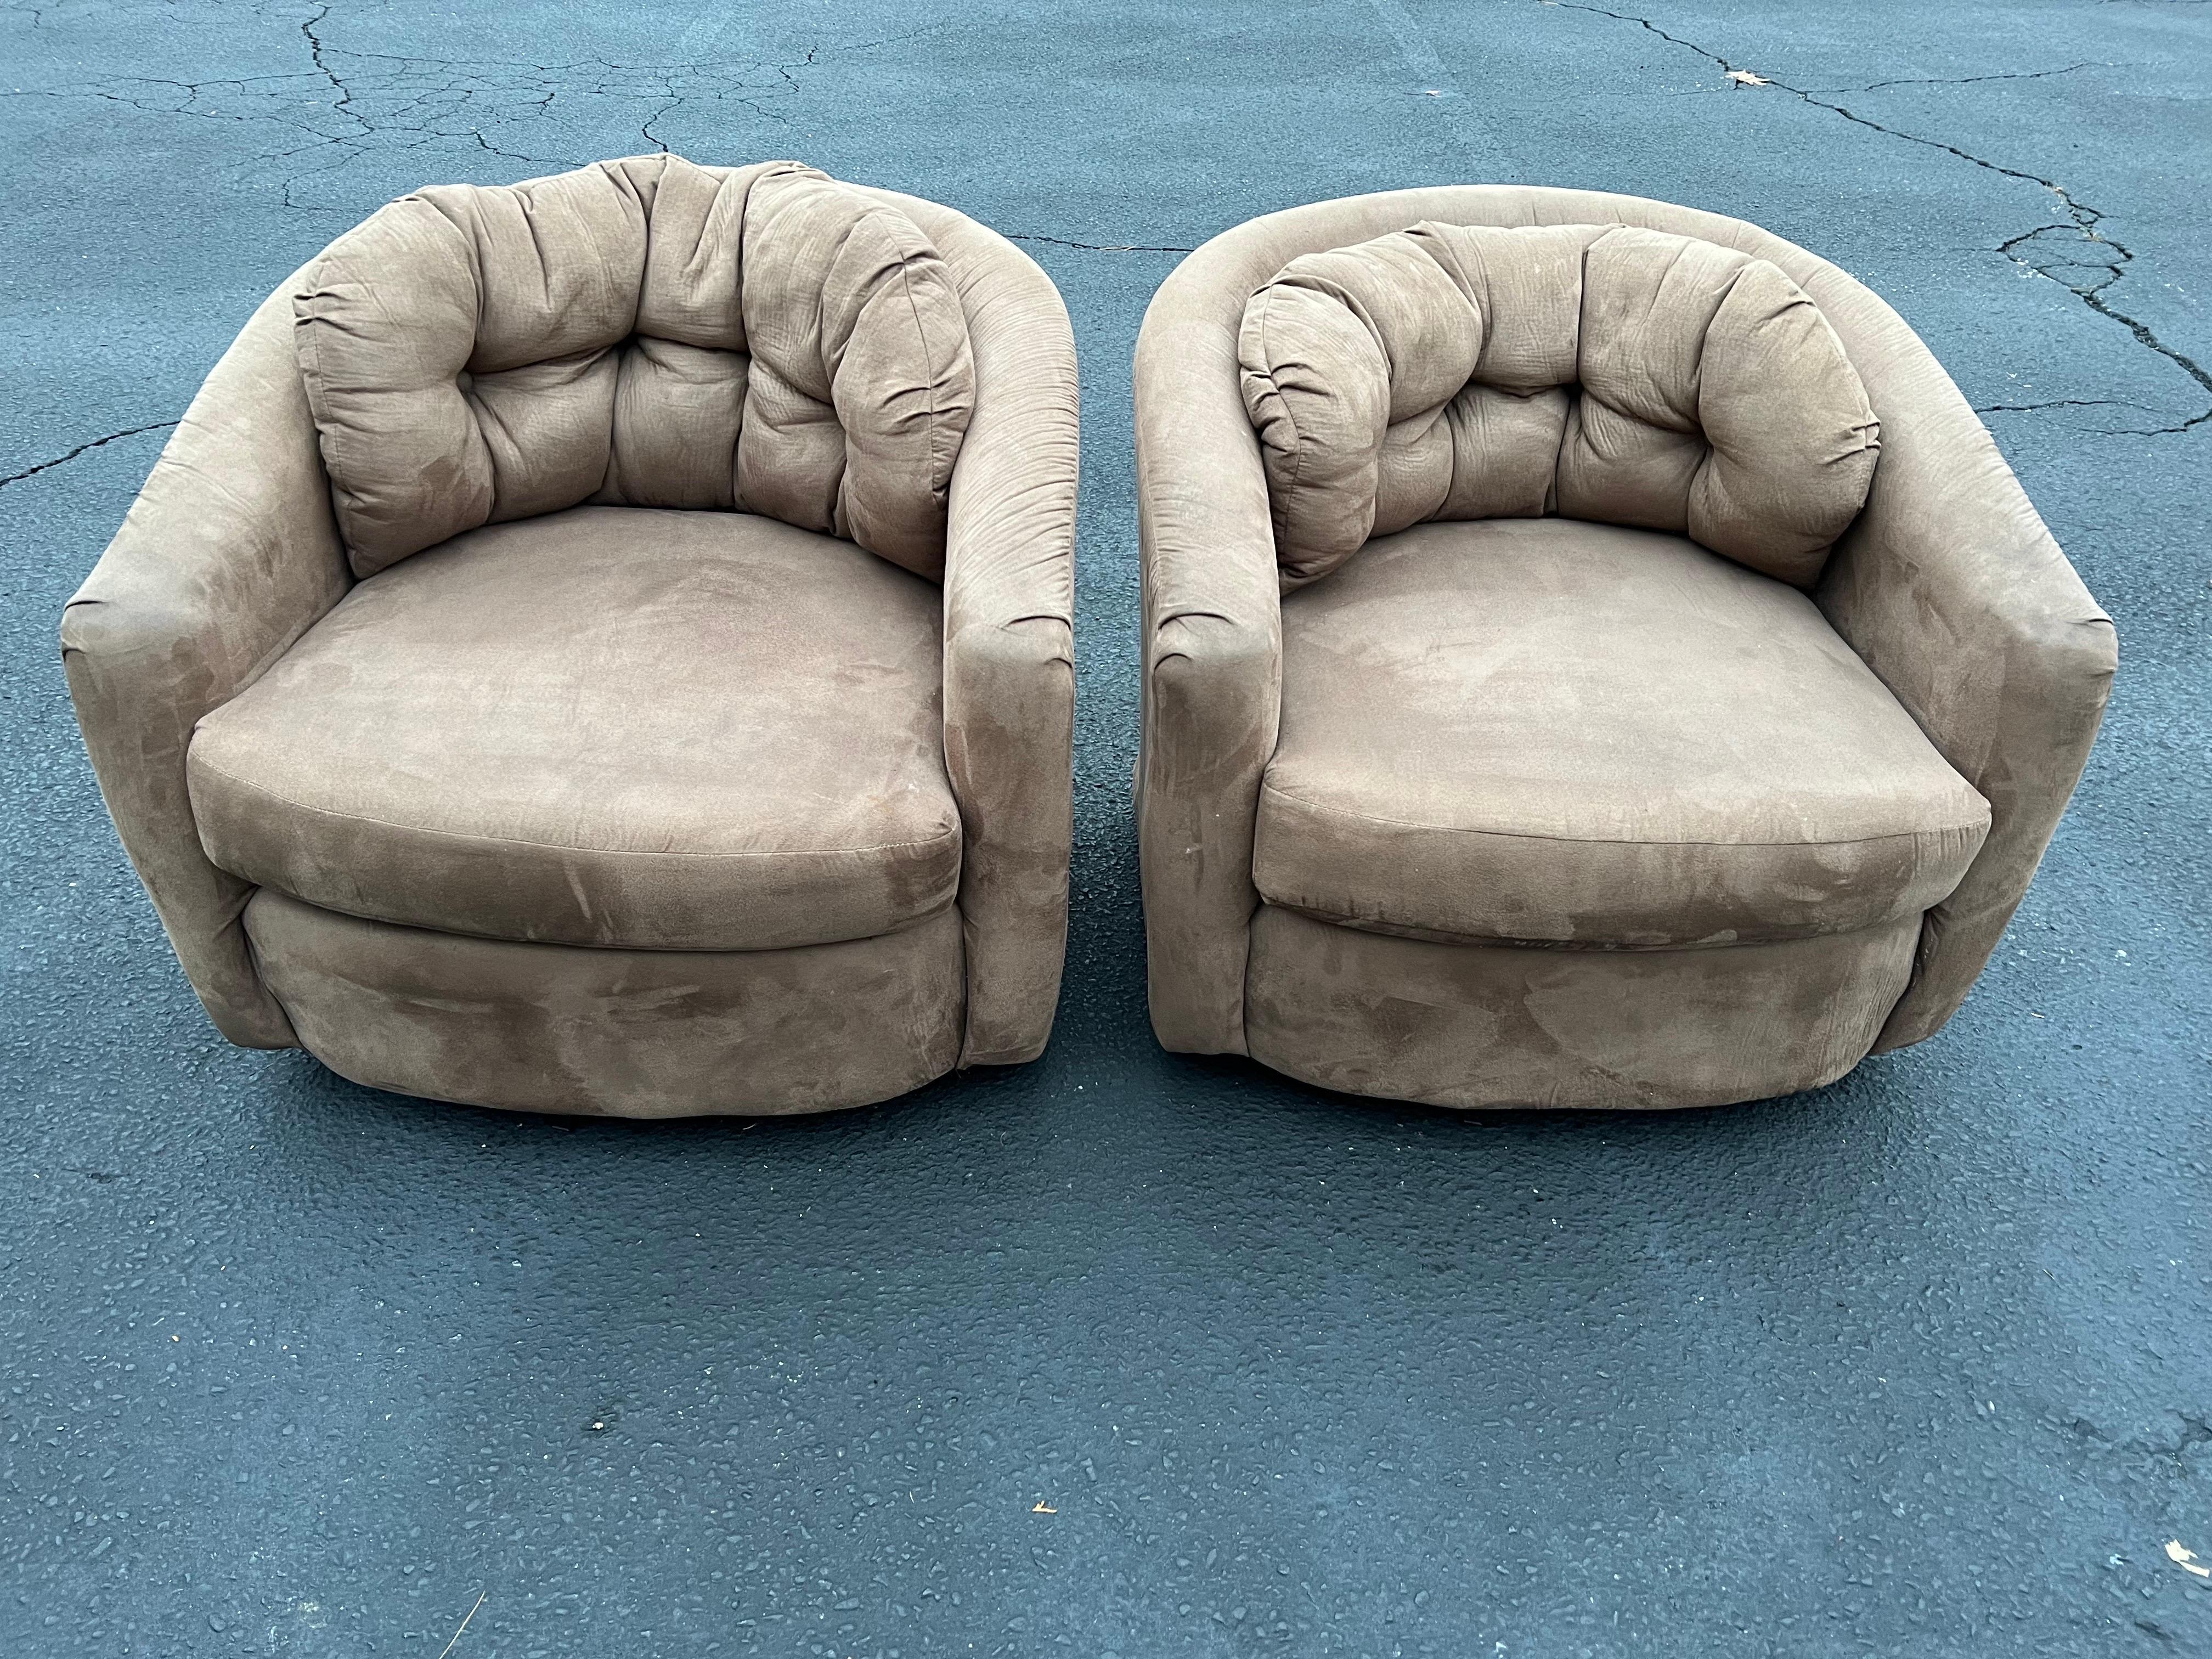 Pair of Mid Century swivel cube chairs. Funky 1970-1980's vibe. Groovy Ultrasuede fabric in a mushroom color. Or milk chocolate color. Cool organic modern boho chic design. Fabulous cube shape with a low profile 